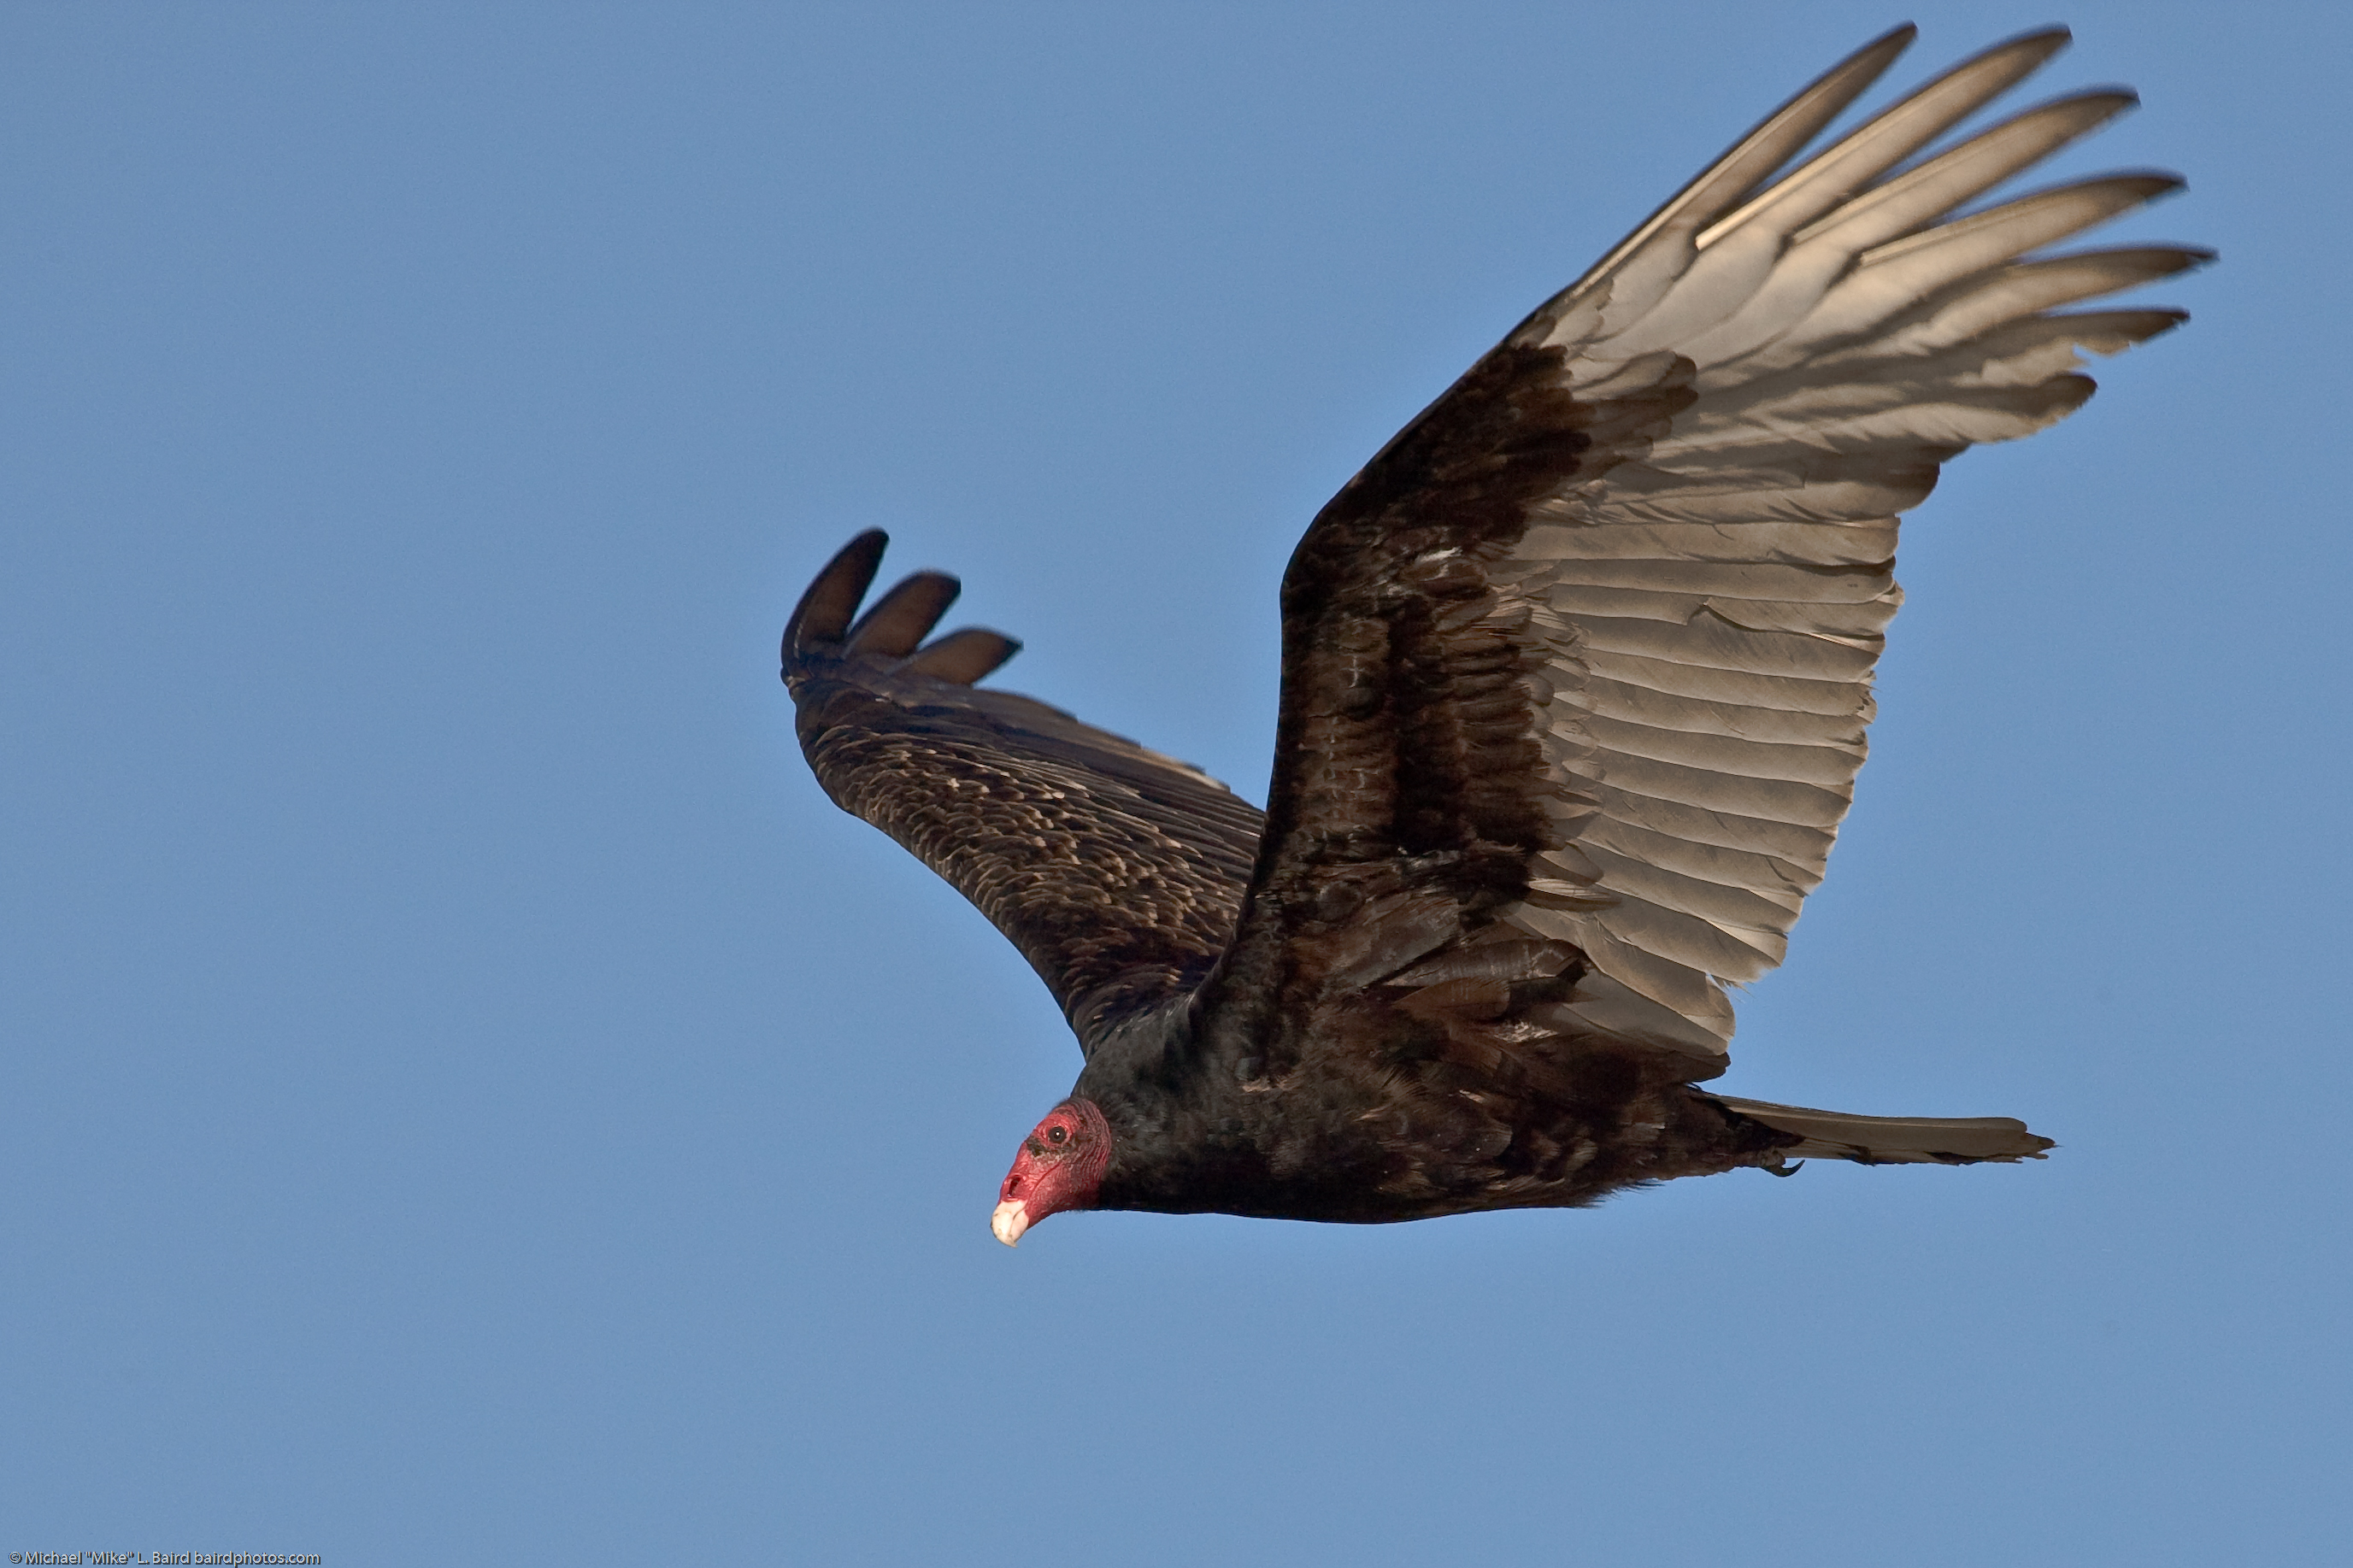 Amazing Turkey Vulture Pictures & Backgrounds